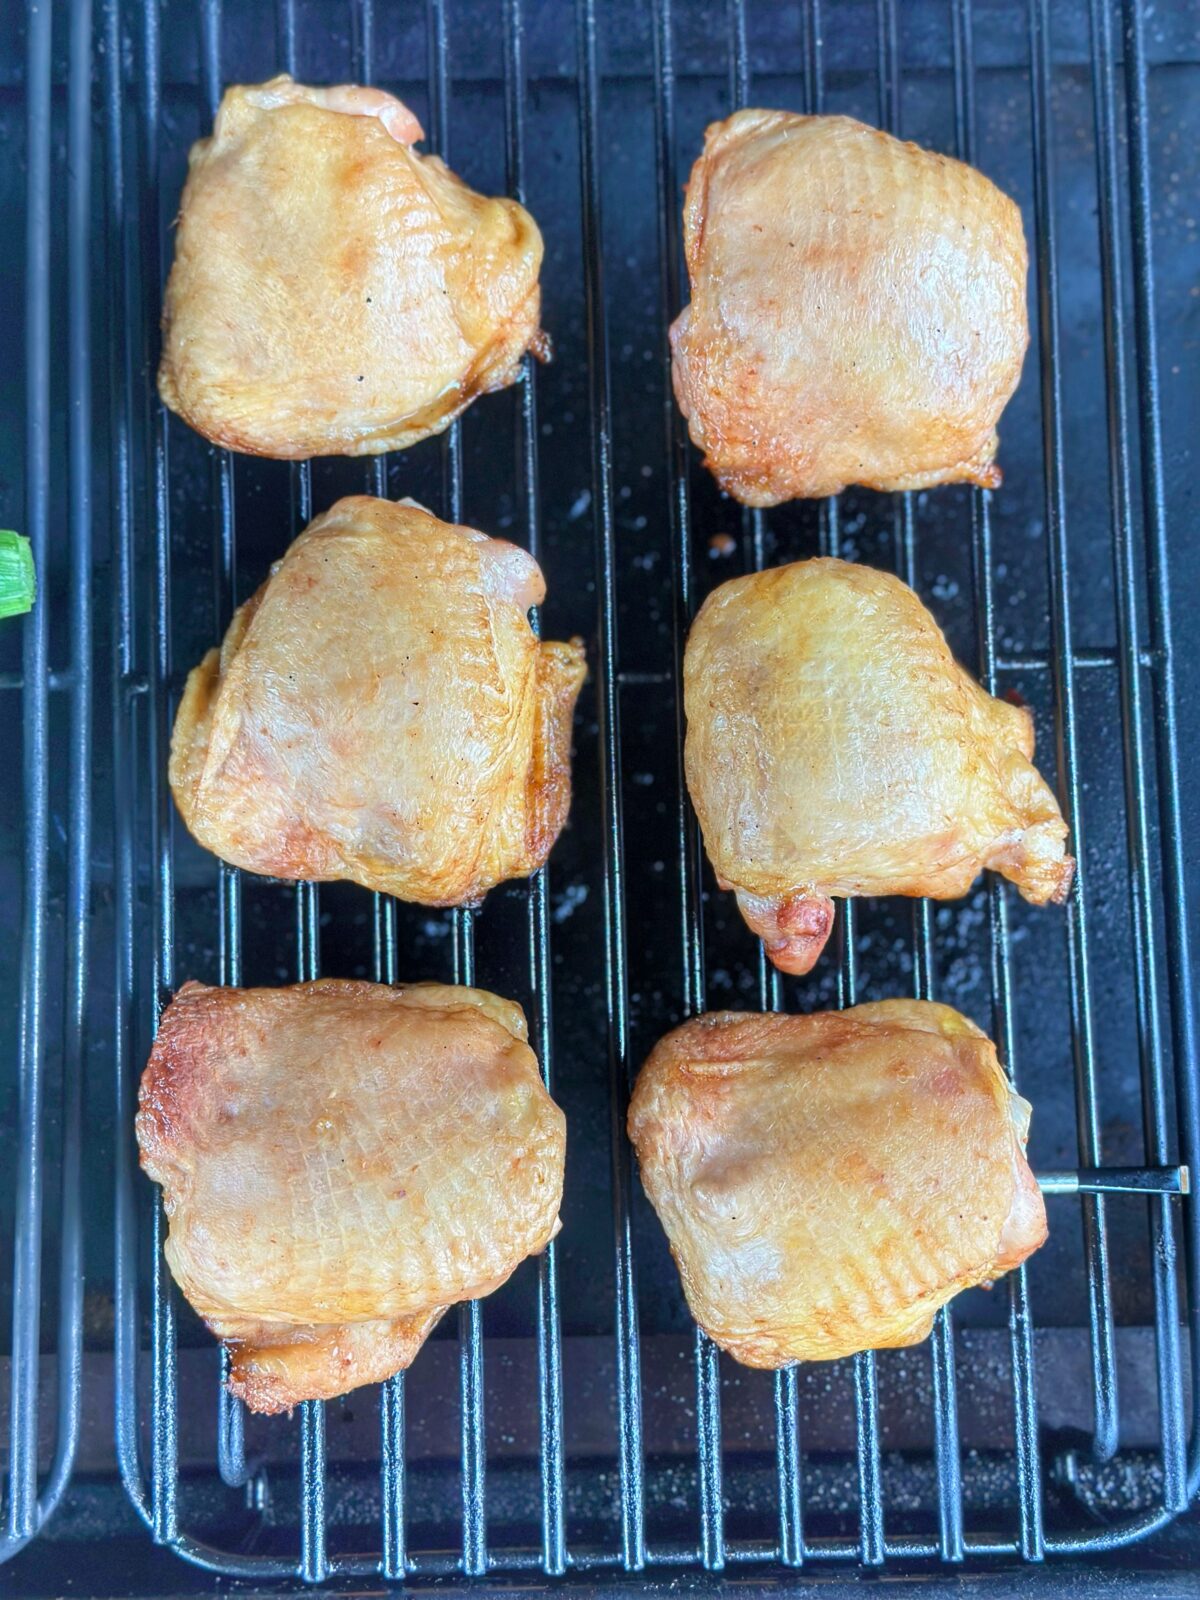 Six chicken thighs on the Traeger grill.